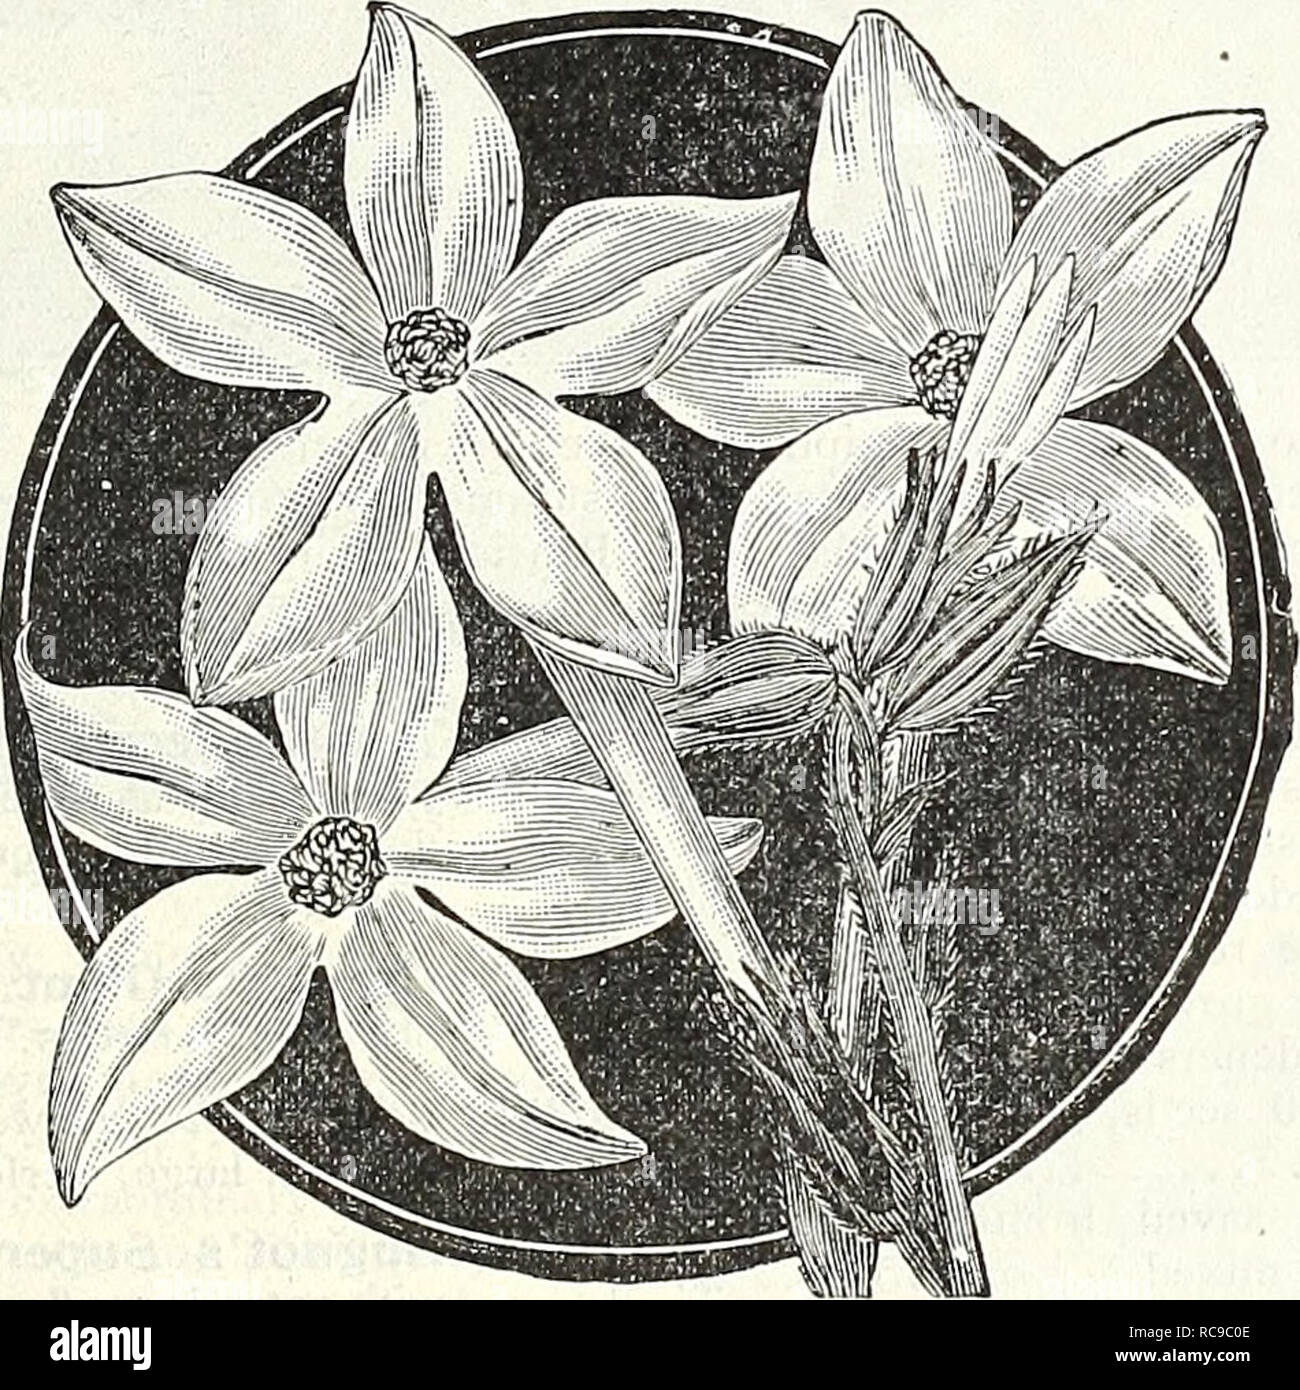 . Dreer's garden book : 1905. Seeds Catalogs; Nursery stock Catalogs; Gardening Equipment and supplies Catalogs; Flowers Seeds Catalogs; Vegetables Seeds Catalogs; Fruit Seeds Catalogs. 10 25 (Cup Flower.) A half-hardy perennial, slender- growing plant, perpetually in bloom, flowering the first year if sown early ; desirable for the greenhouse, baskets, vases, or bedding out; 1 ft. 3421 Frutescens. White, tinted with lilac 10. NiCOTIANA AfFINIS. NEMOPHILA. (Love-grove.) PER PKT. 3400 Of neat, compact habit; blooming freely all sum- mer, if planted in a rather cool, shady place, and in not too  Stock Photo